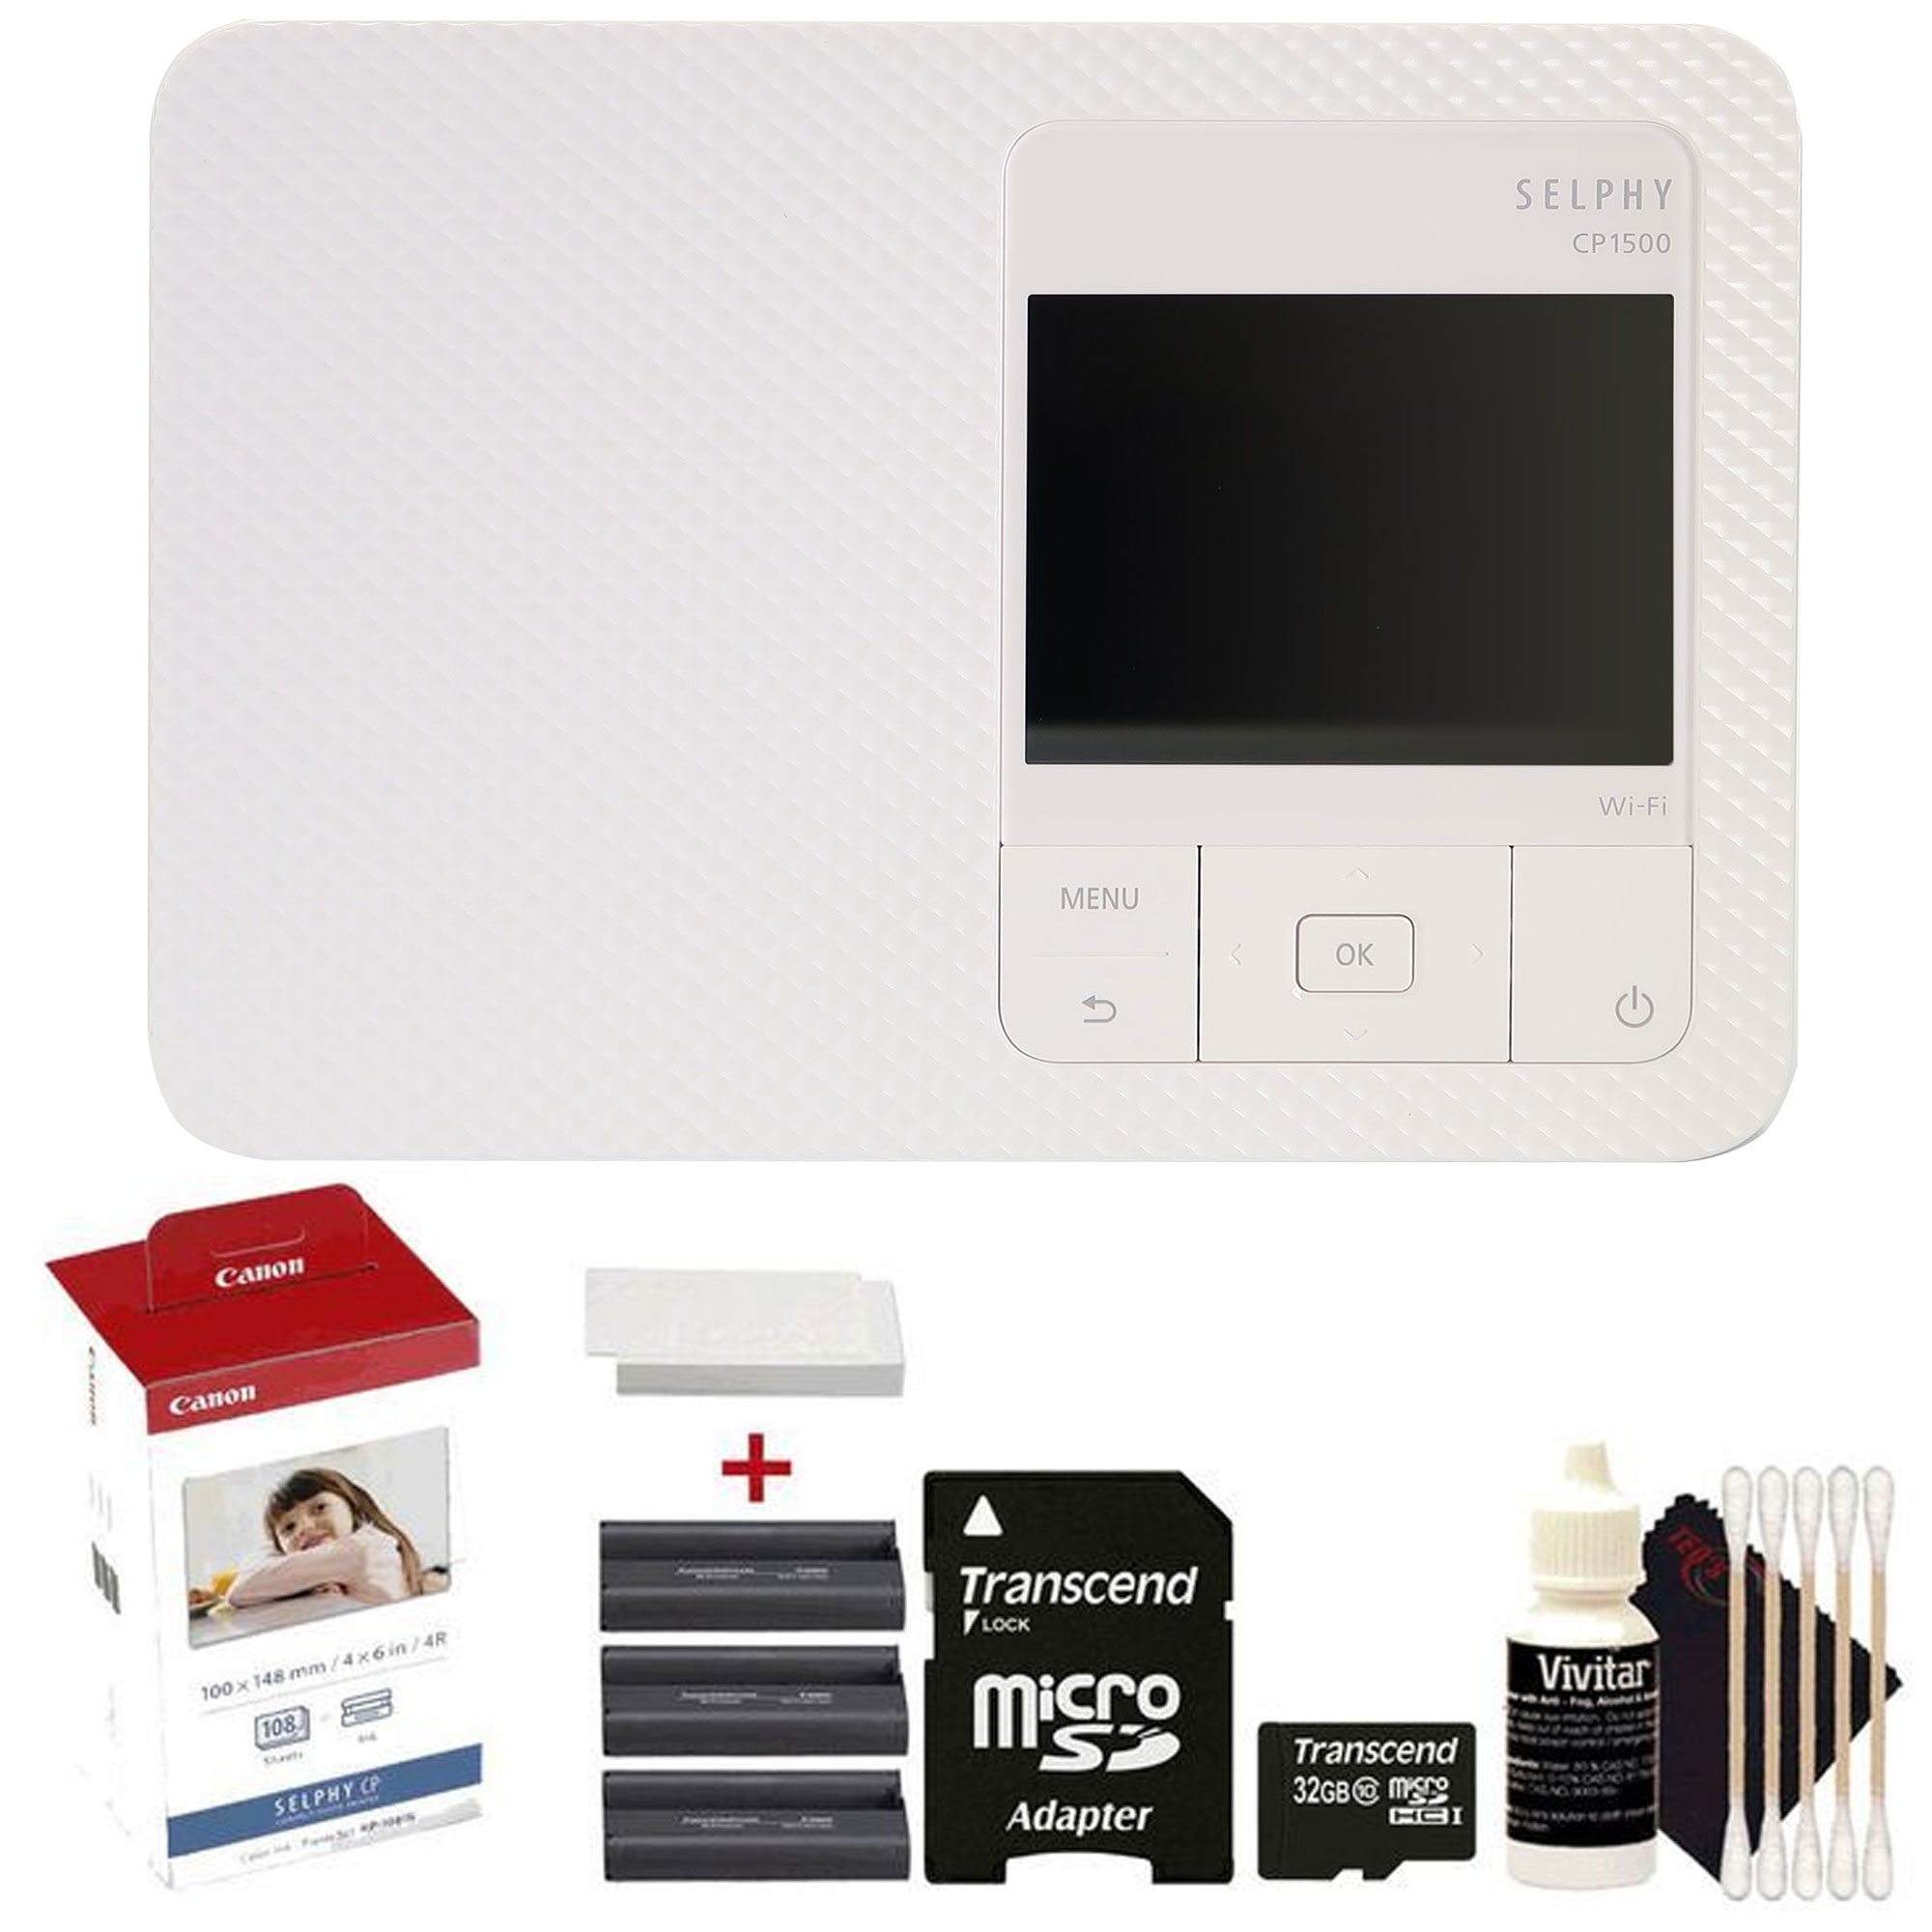 Canon SELPHY CP1500 Compact Photo Printer (White) with KP-108IN Selphy Color Ink 4x6 Paper Set Accessory Kit